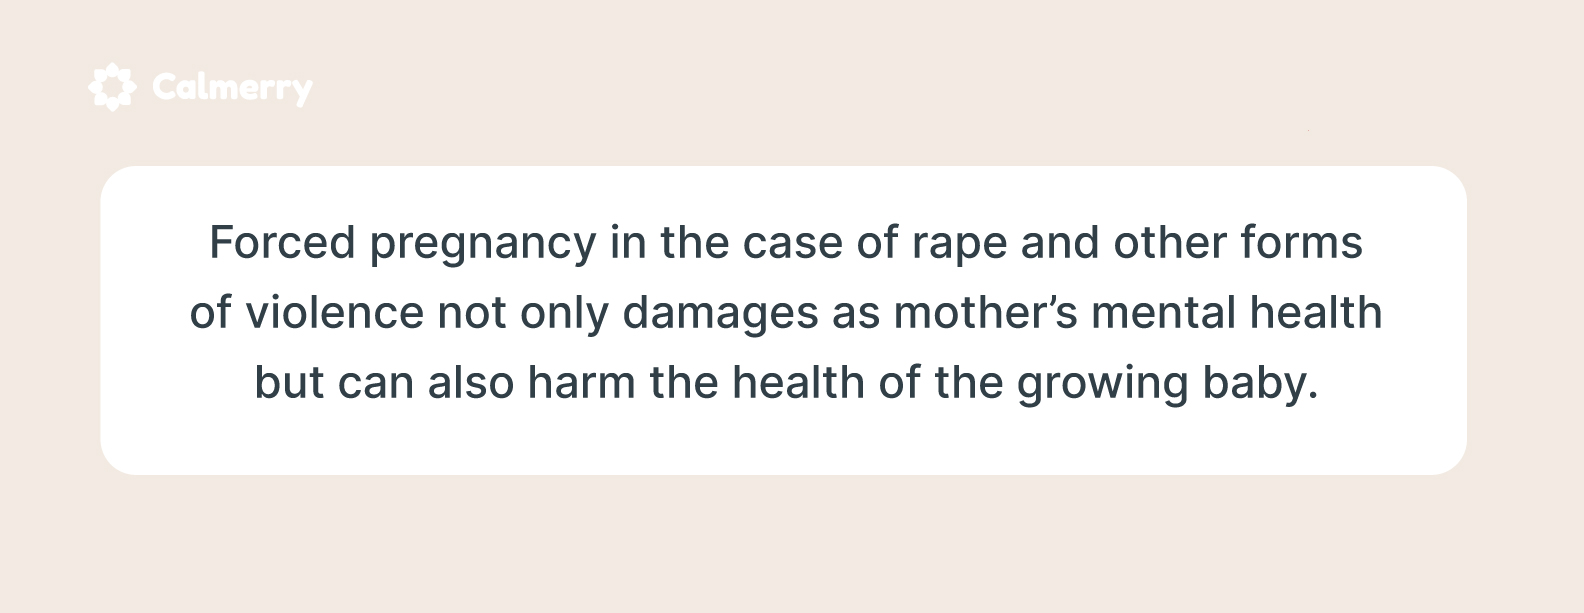 Forced pregnancy in the case of rape and other forms of violence